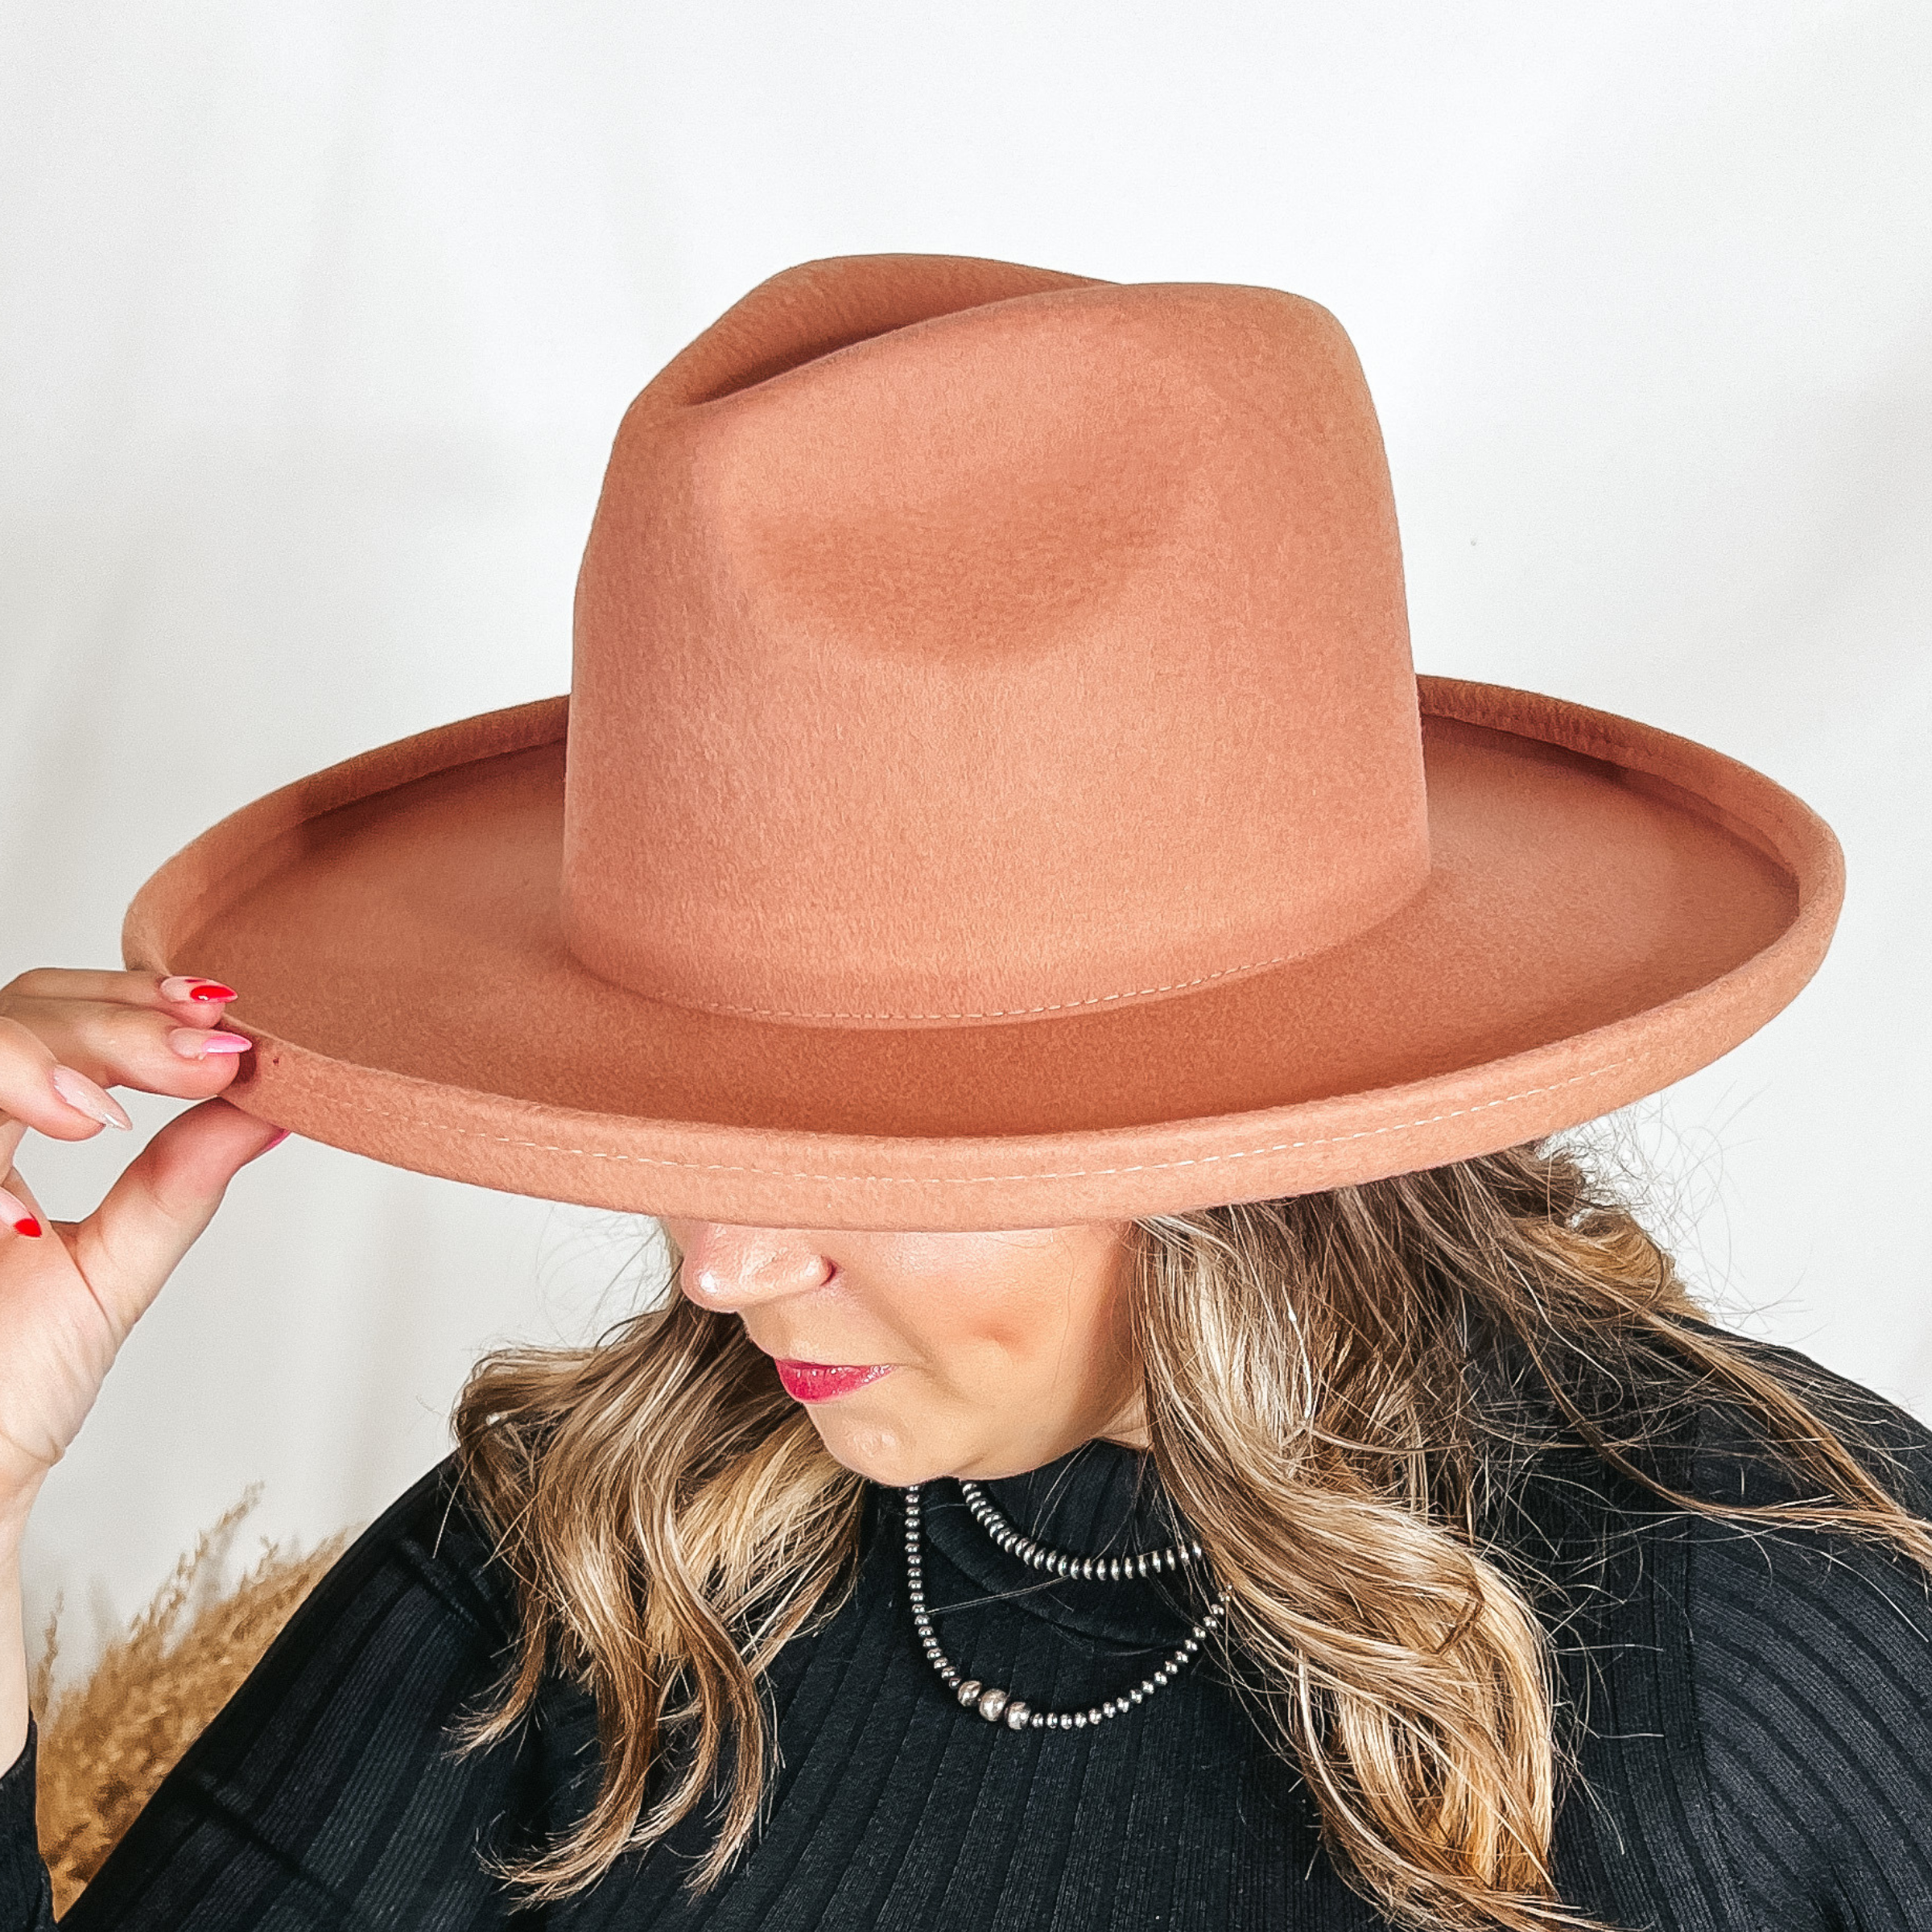 Model is wearing a coral pink rancher hat that is felt. The hat has a flat brim with a pencil roll end.